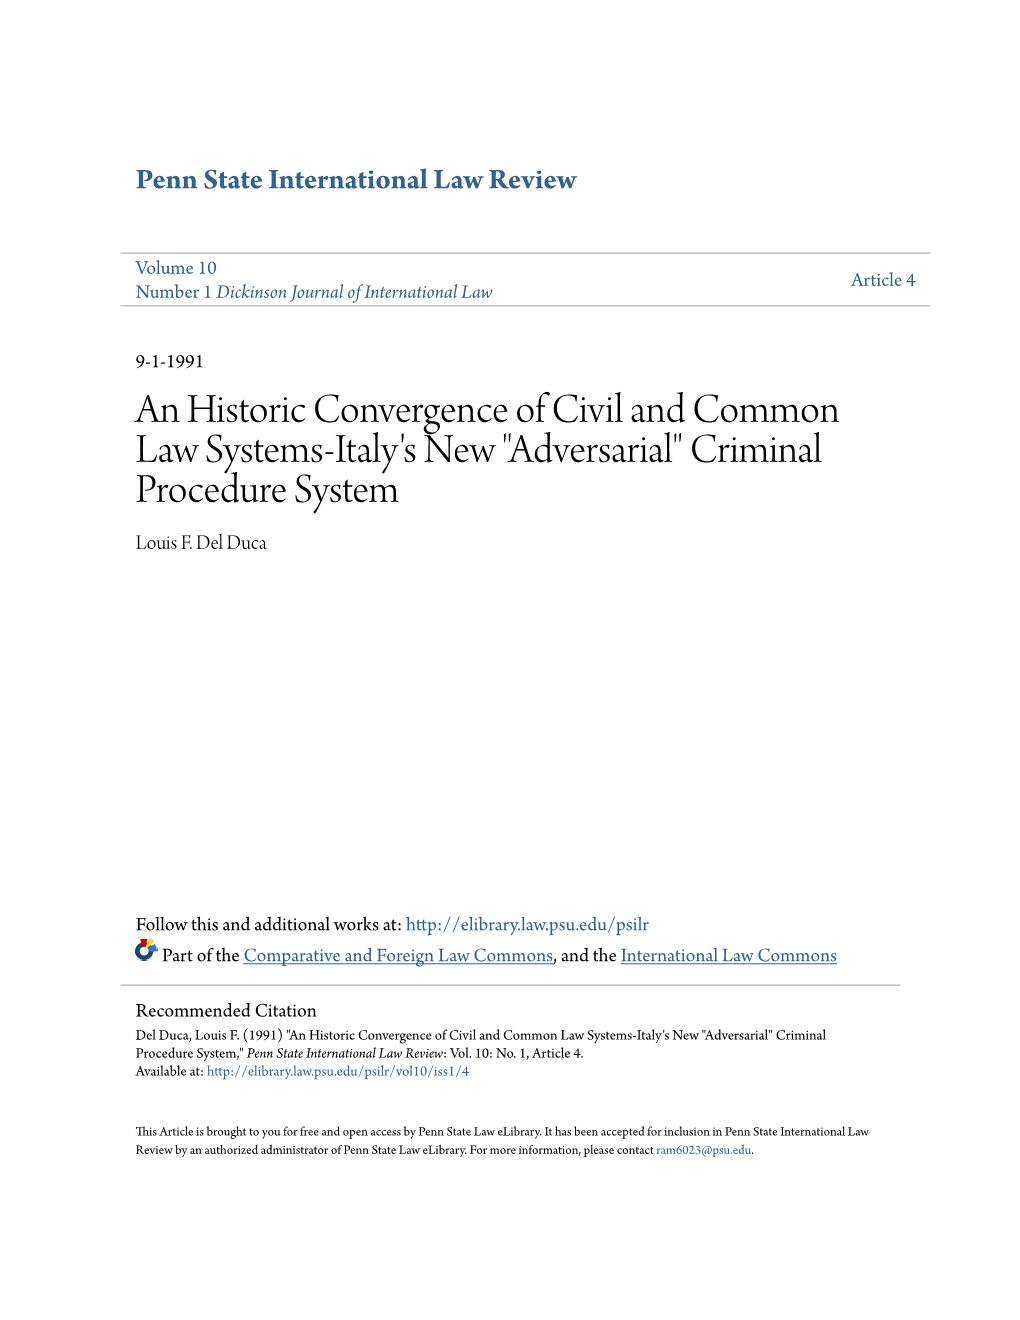 An Historic Convergence of Civil and Common Law Systems-Italy's New "Adversarial" Criminal Procedure System Louis F